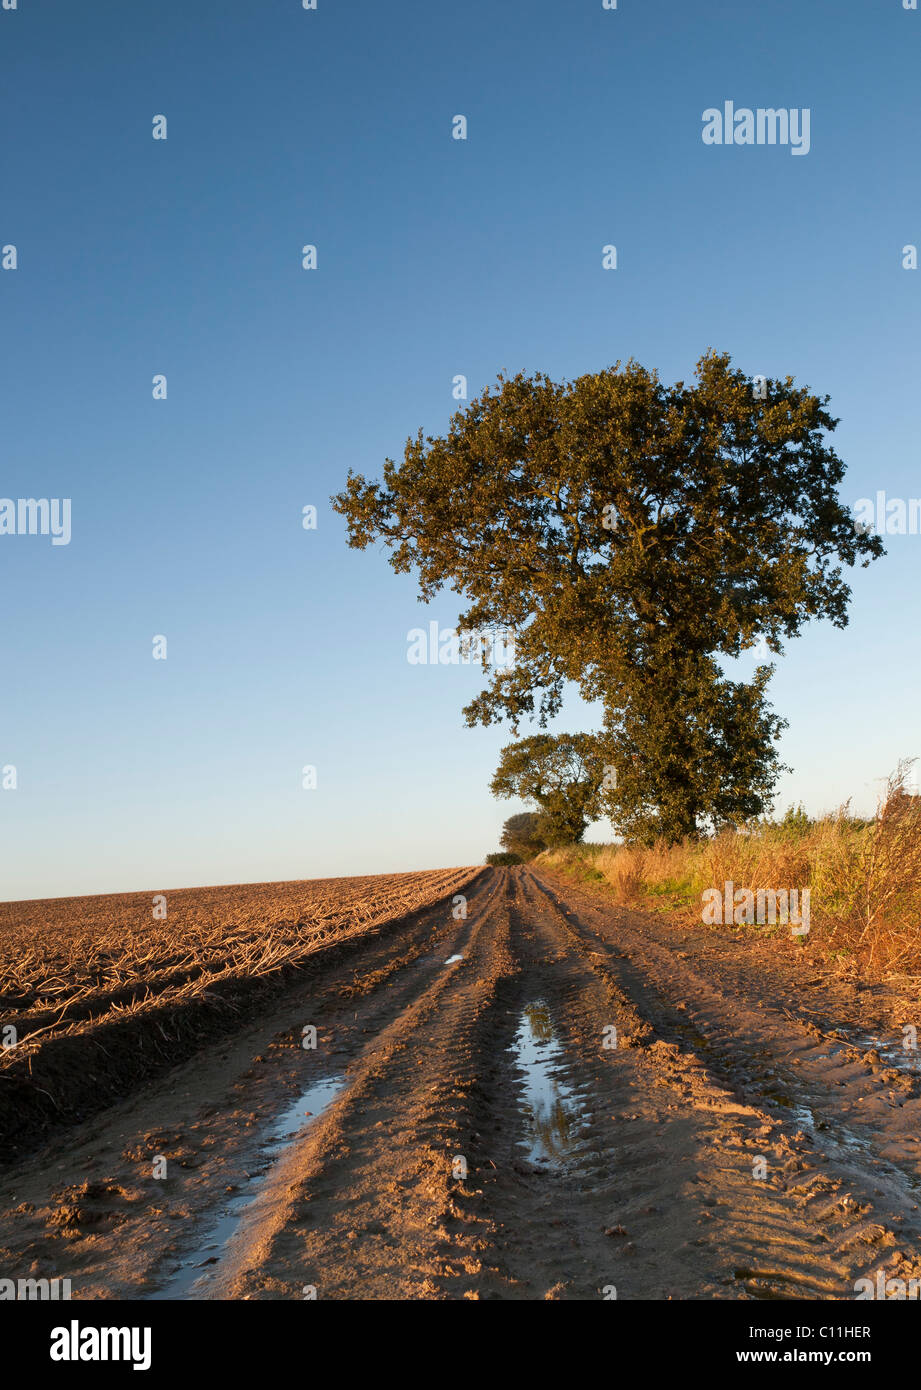 A country track beside a potato field ready to be harvested, with oak trees. Stock Photo